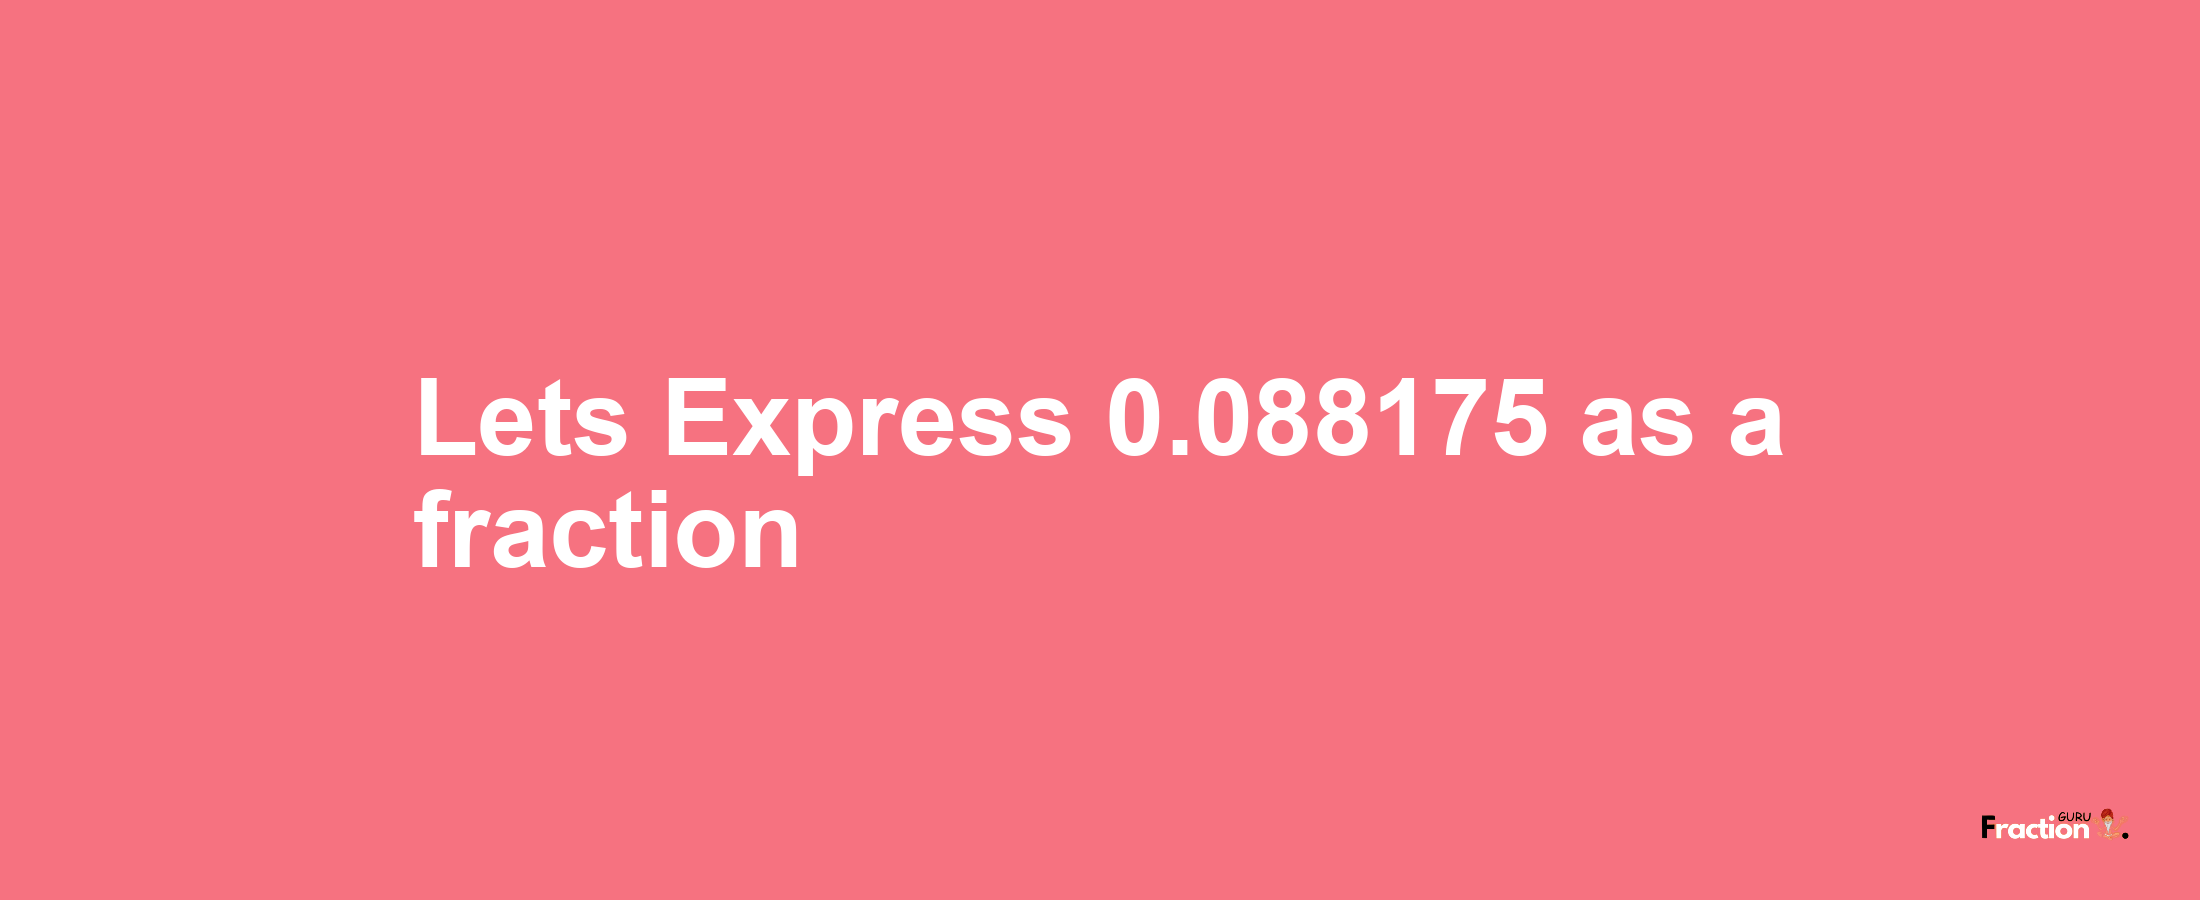 Lets Express 0.088175 as afraction